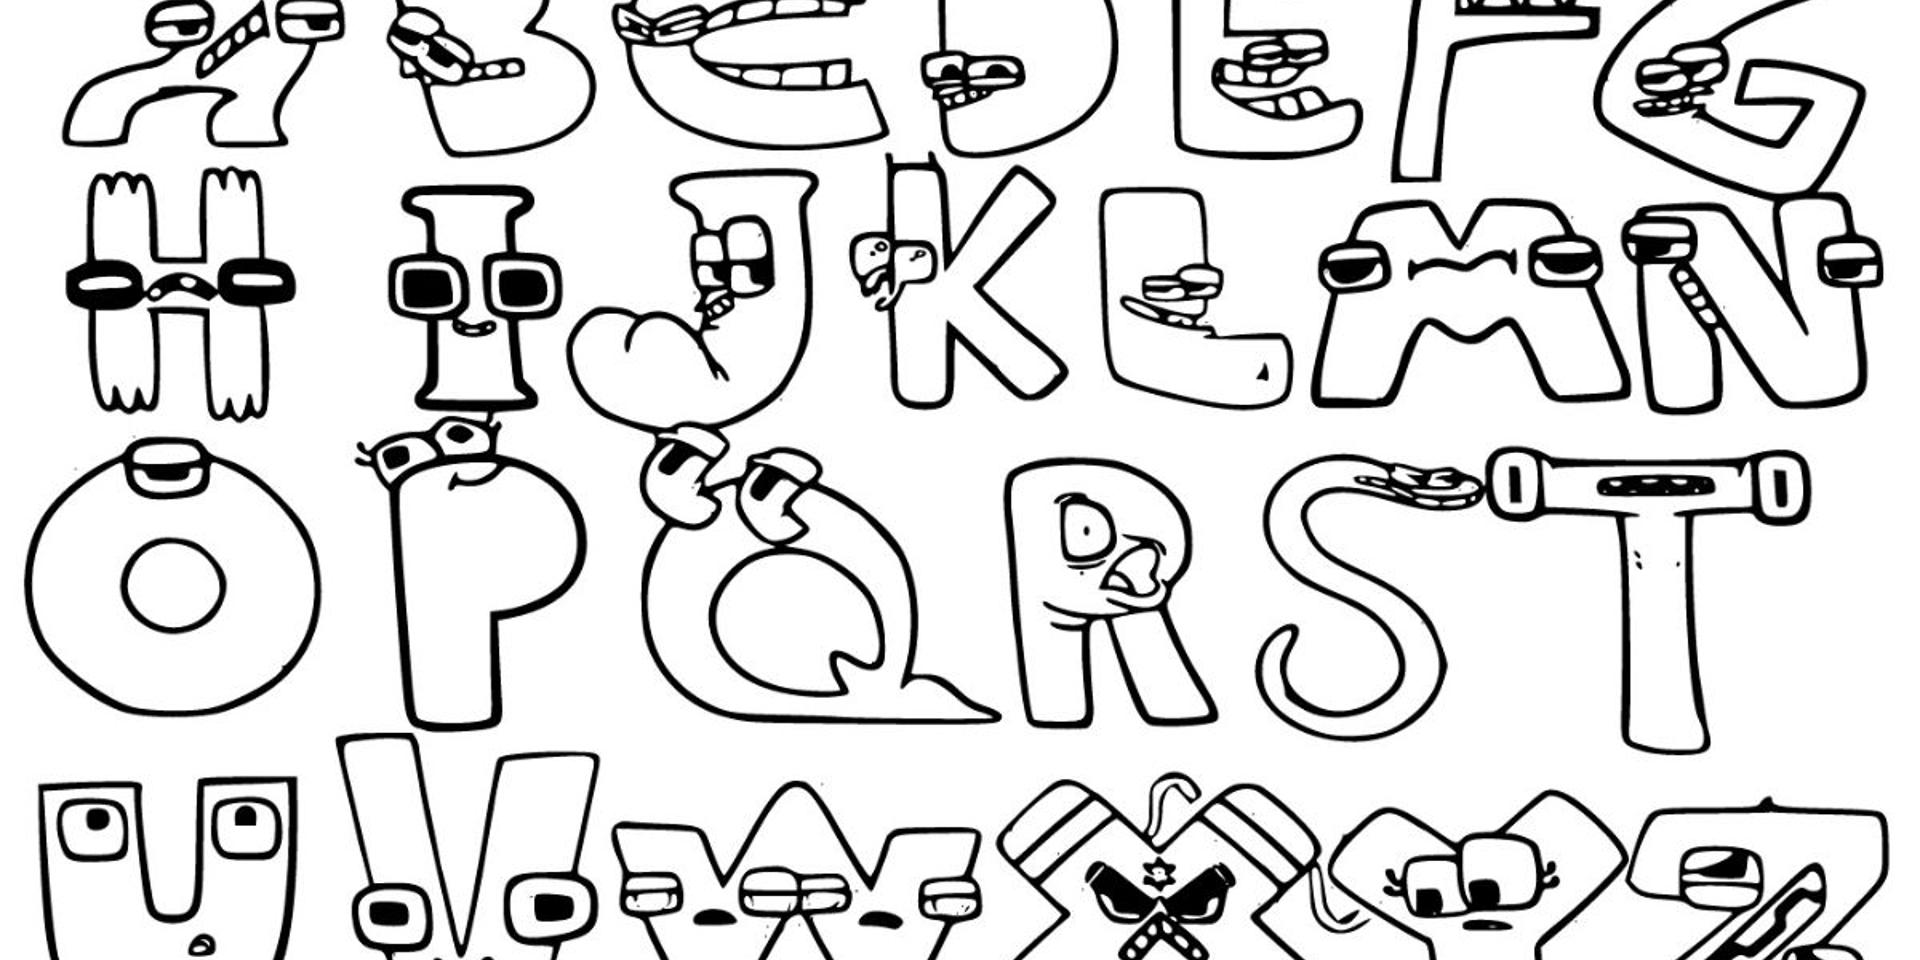 Alphabet lore coloring pages the perfect blend of learning and fun